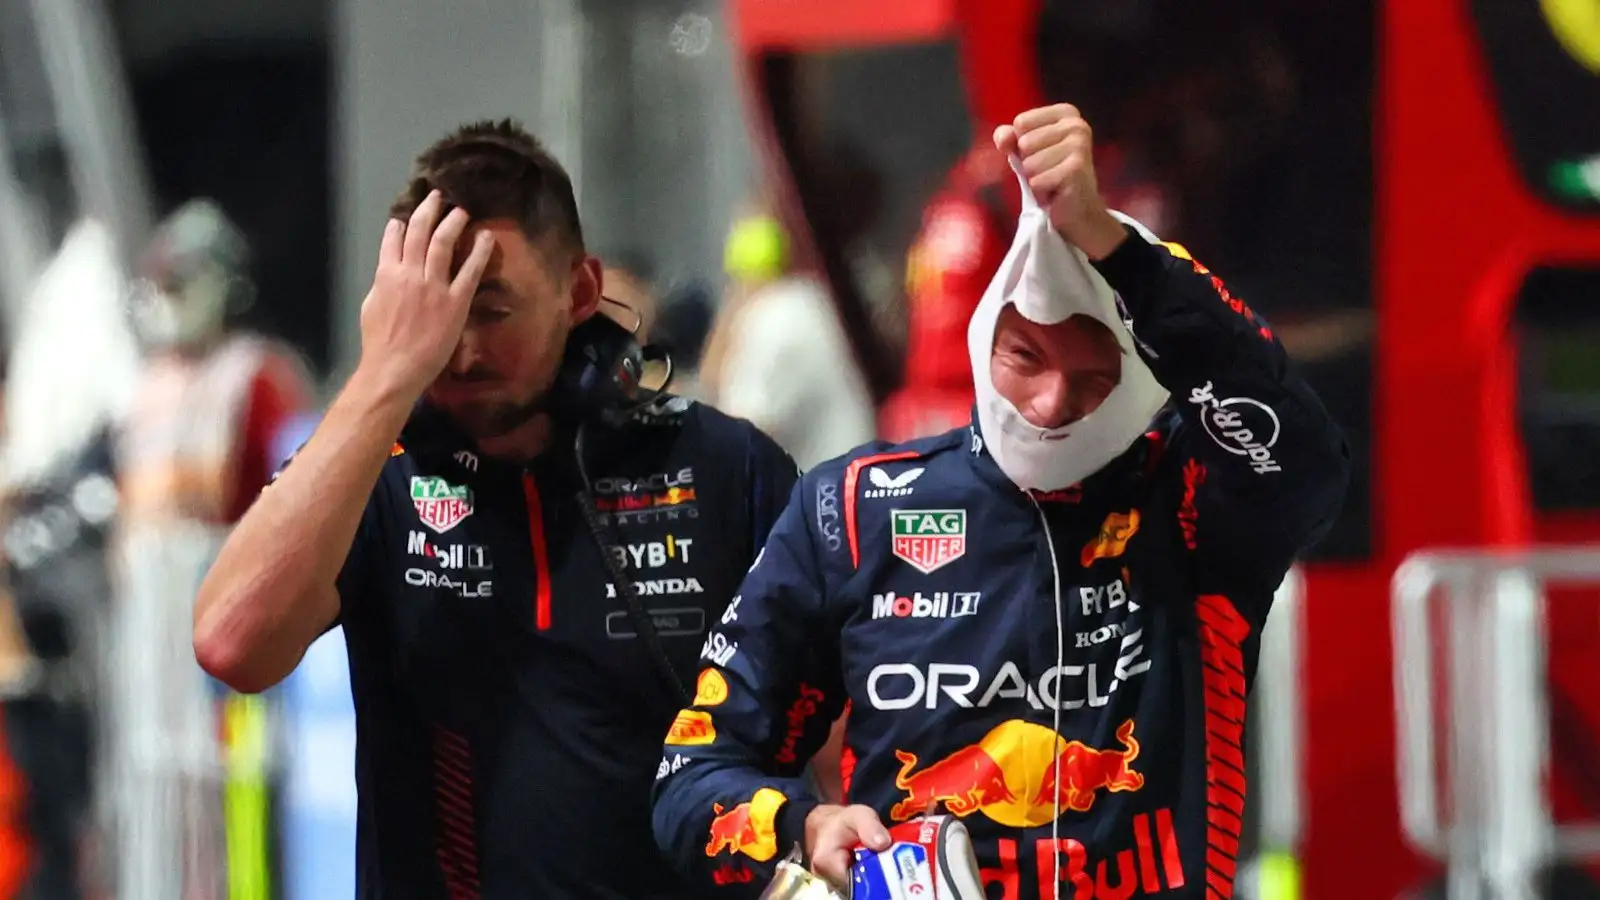 Max Verstappen pulls off his fireproofs after exiting qualifying in Singapore.